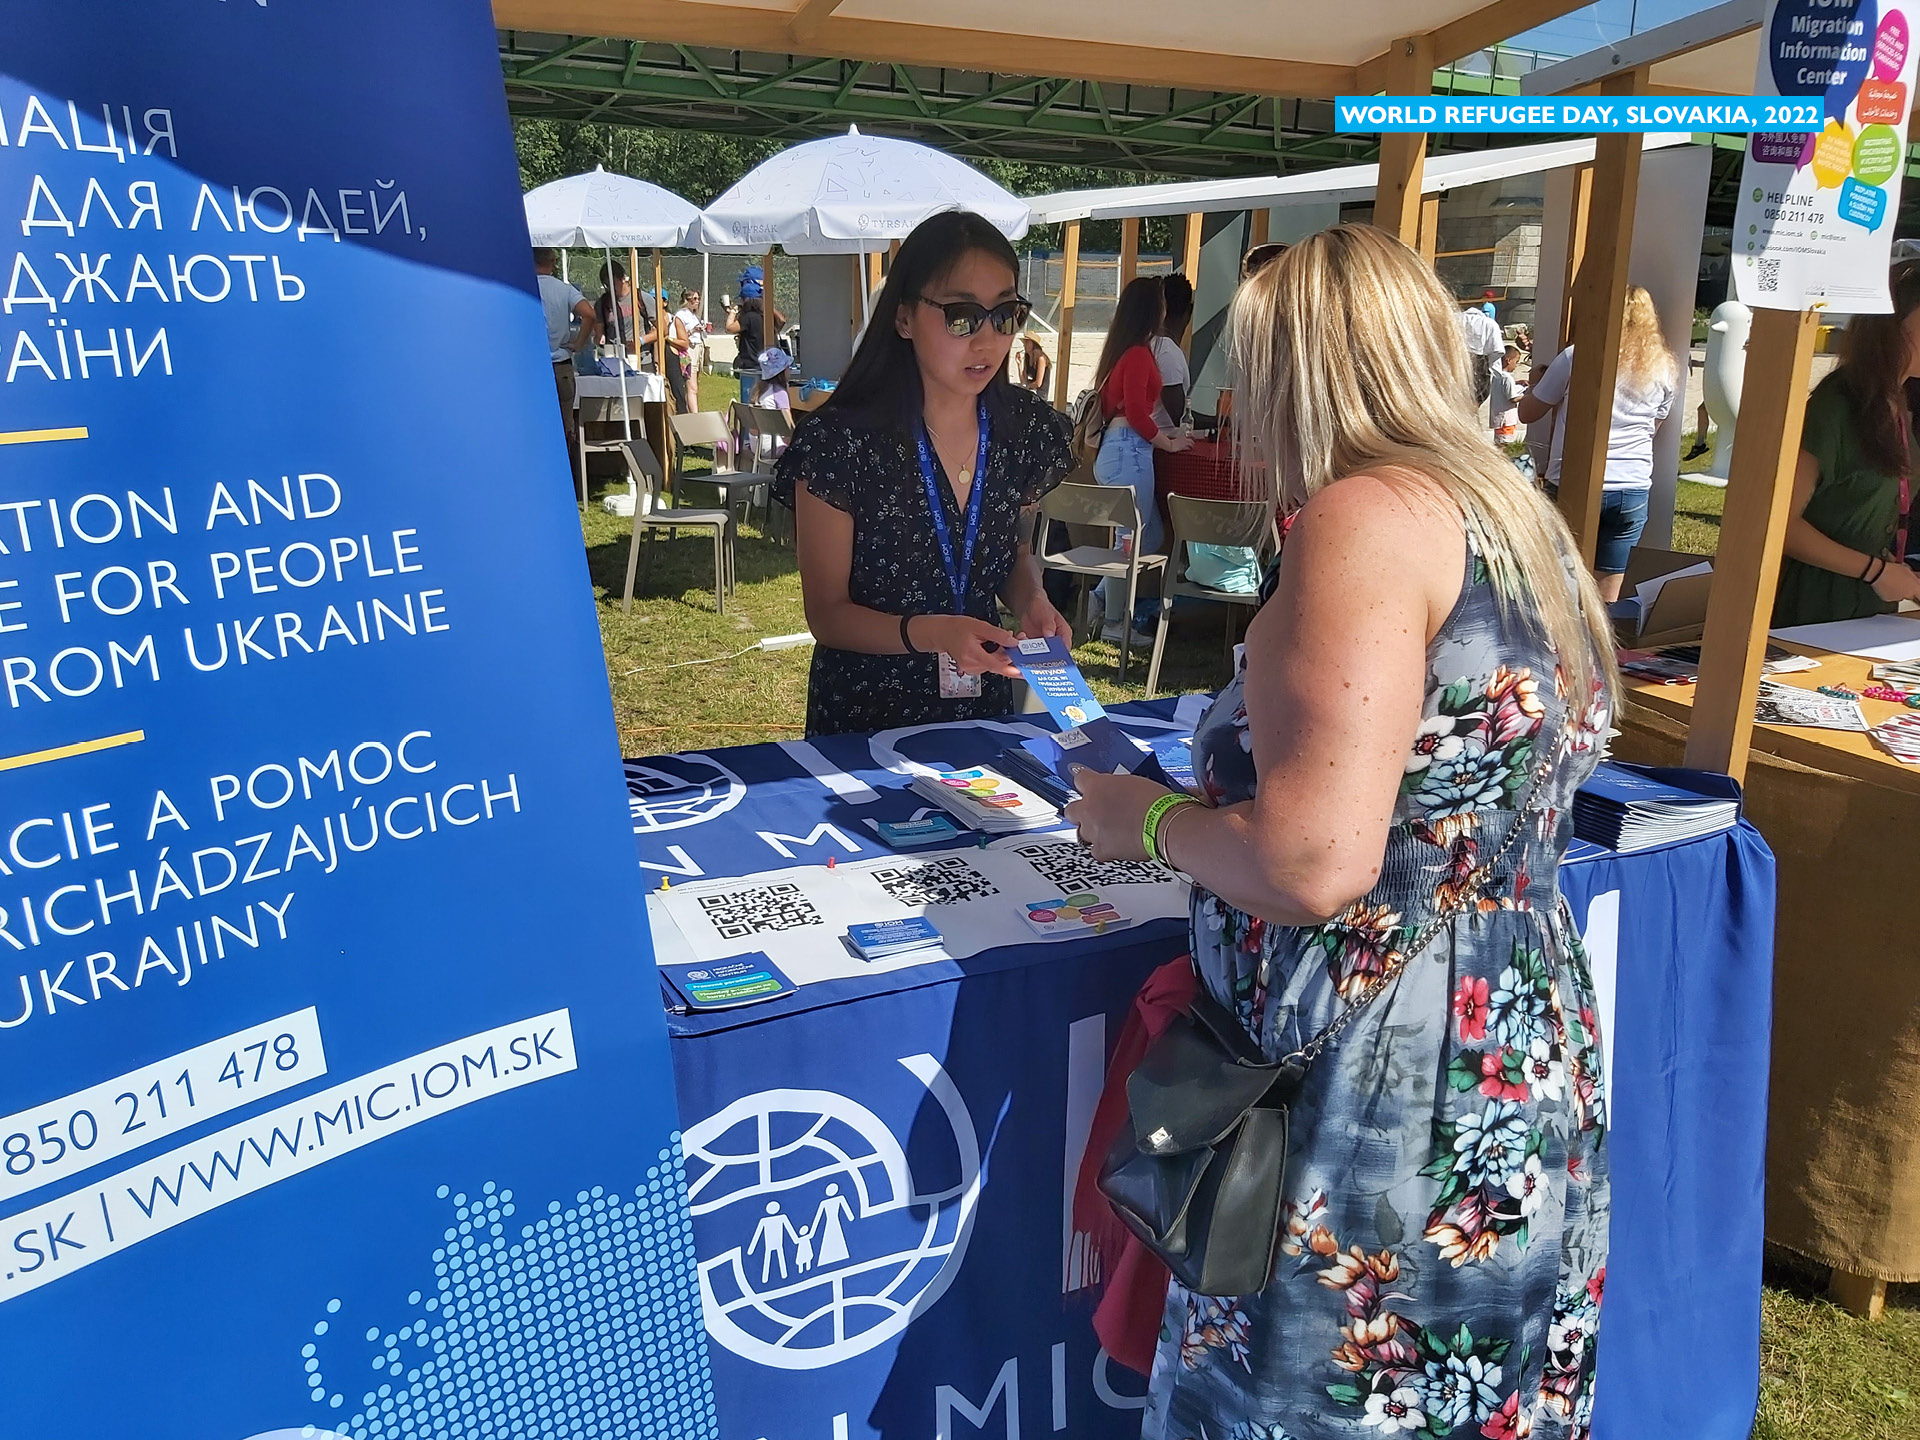 IOM stand at the event in Bratislava – World Refuee Day 2022. Photo © International Organization for Migration (IOM) 2022.